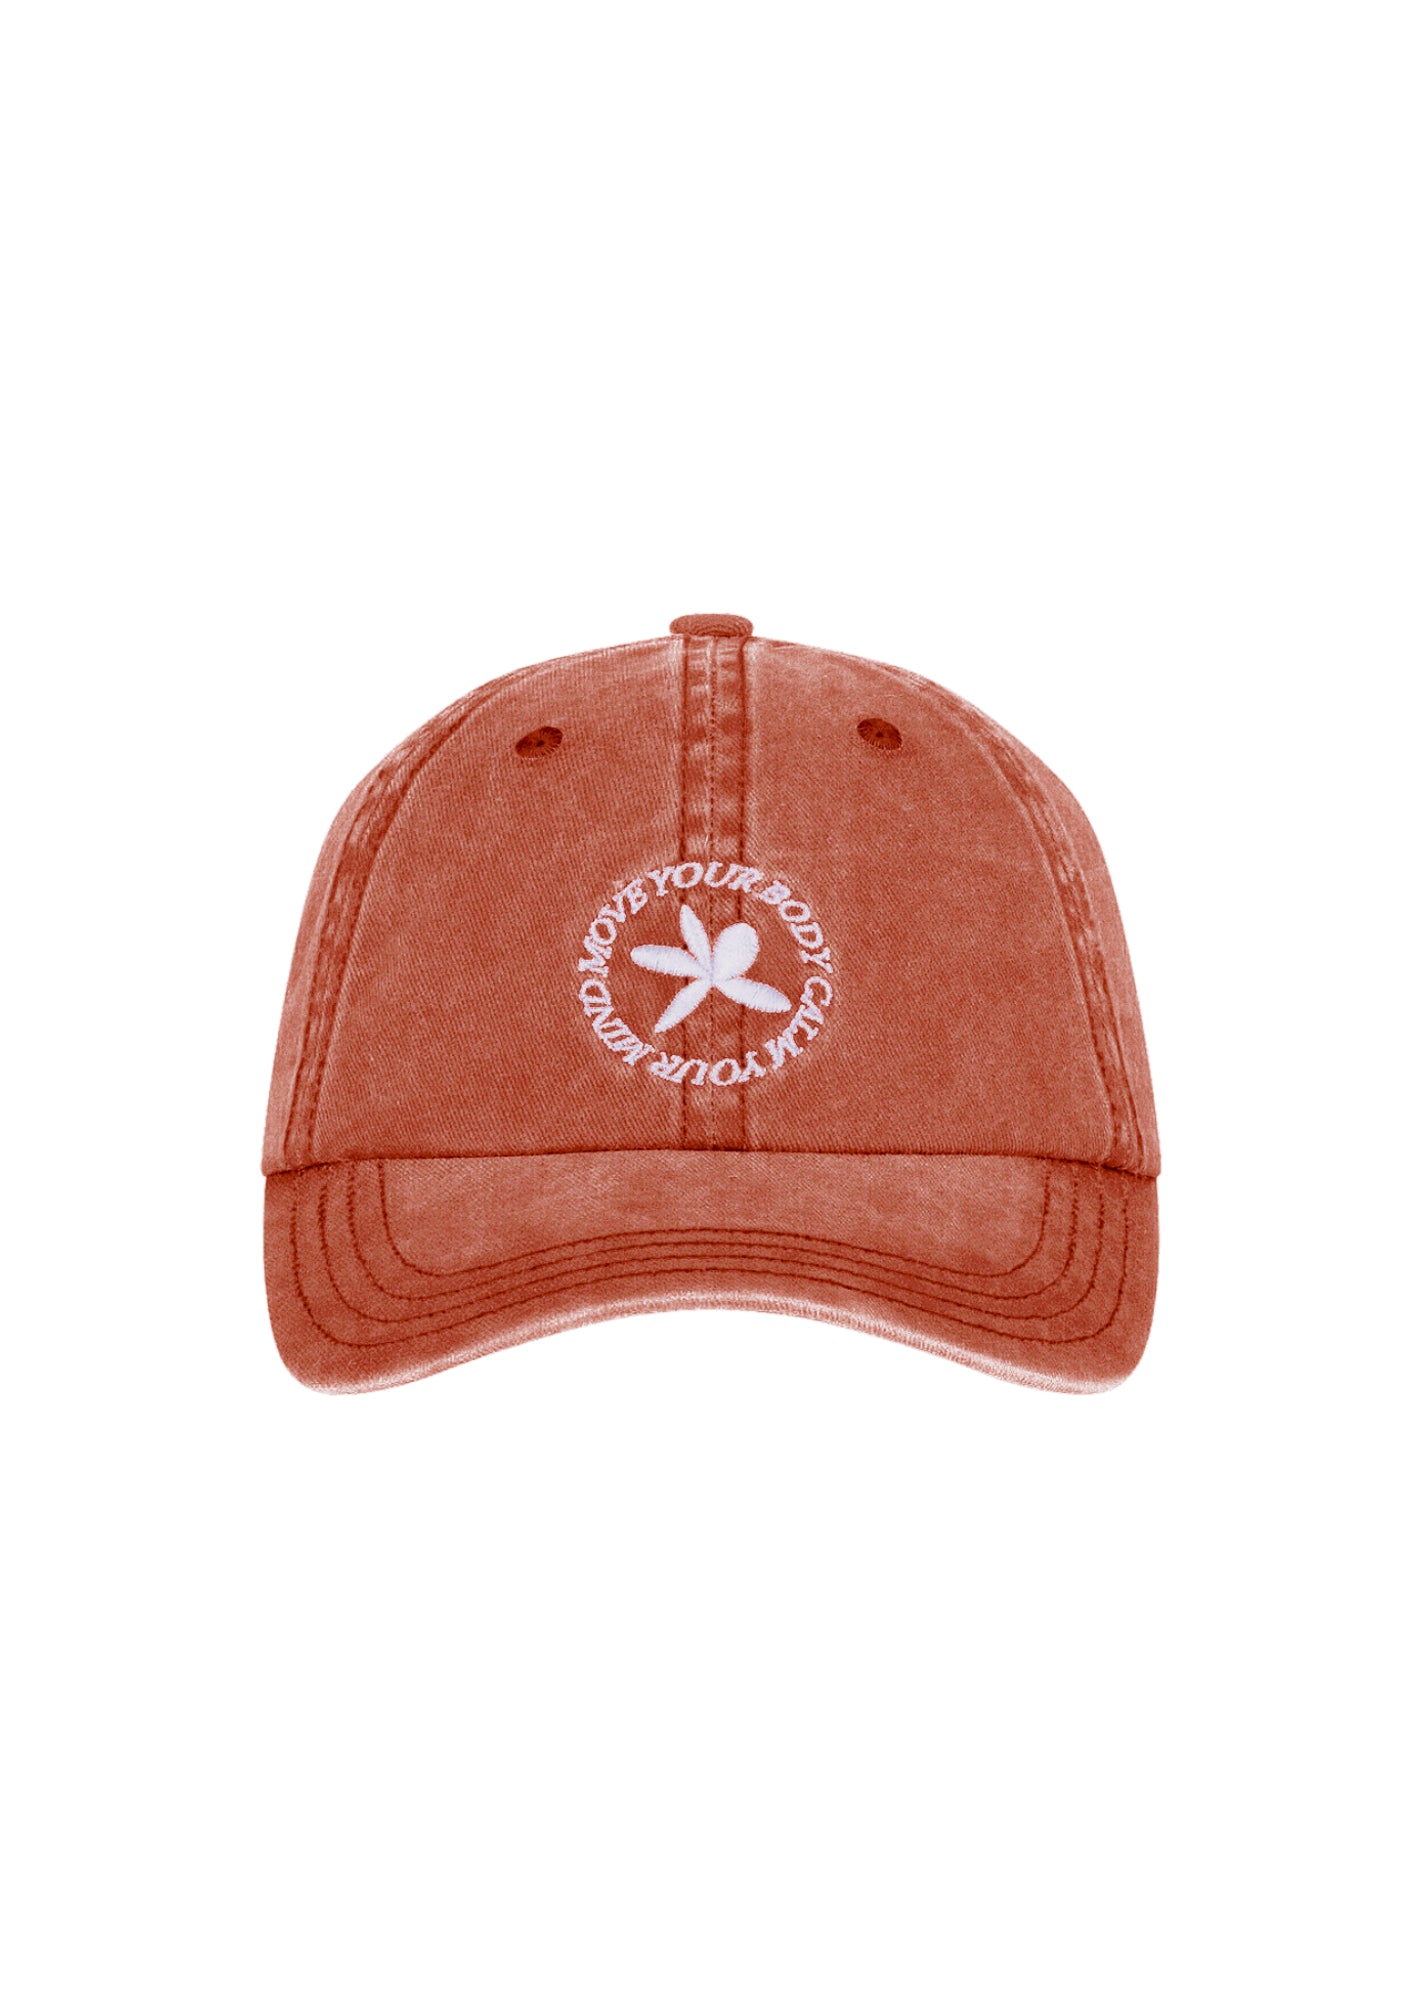 Hat - Move Your Body Dad Cap - Stone Wash Red